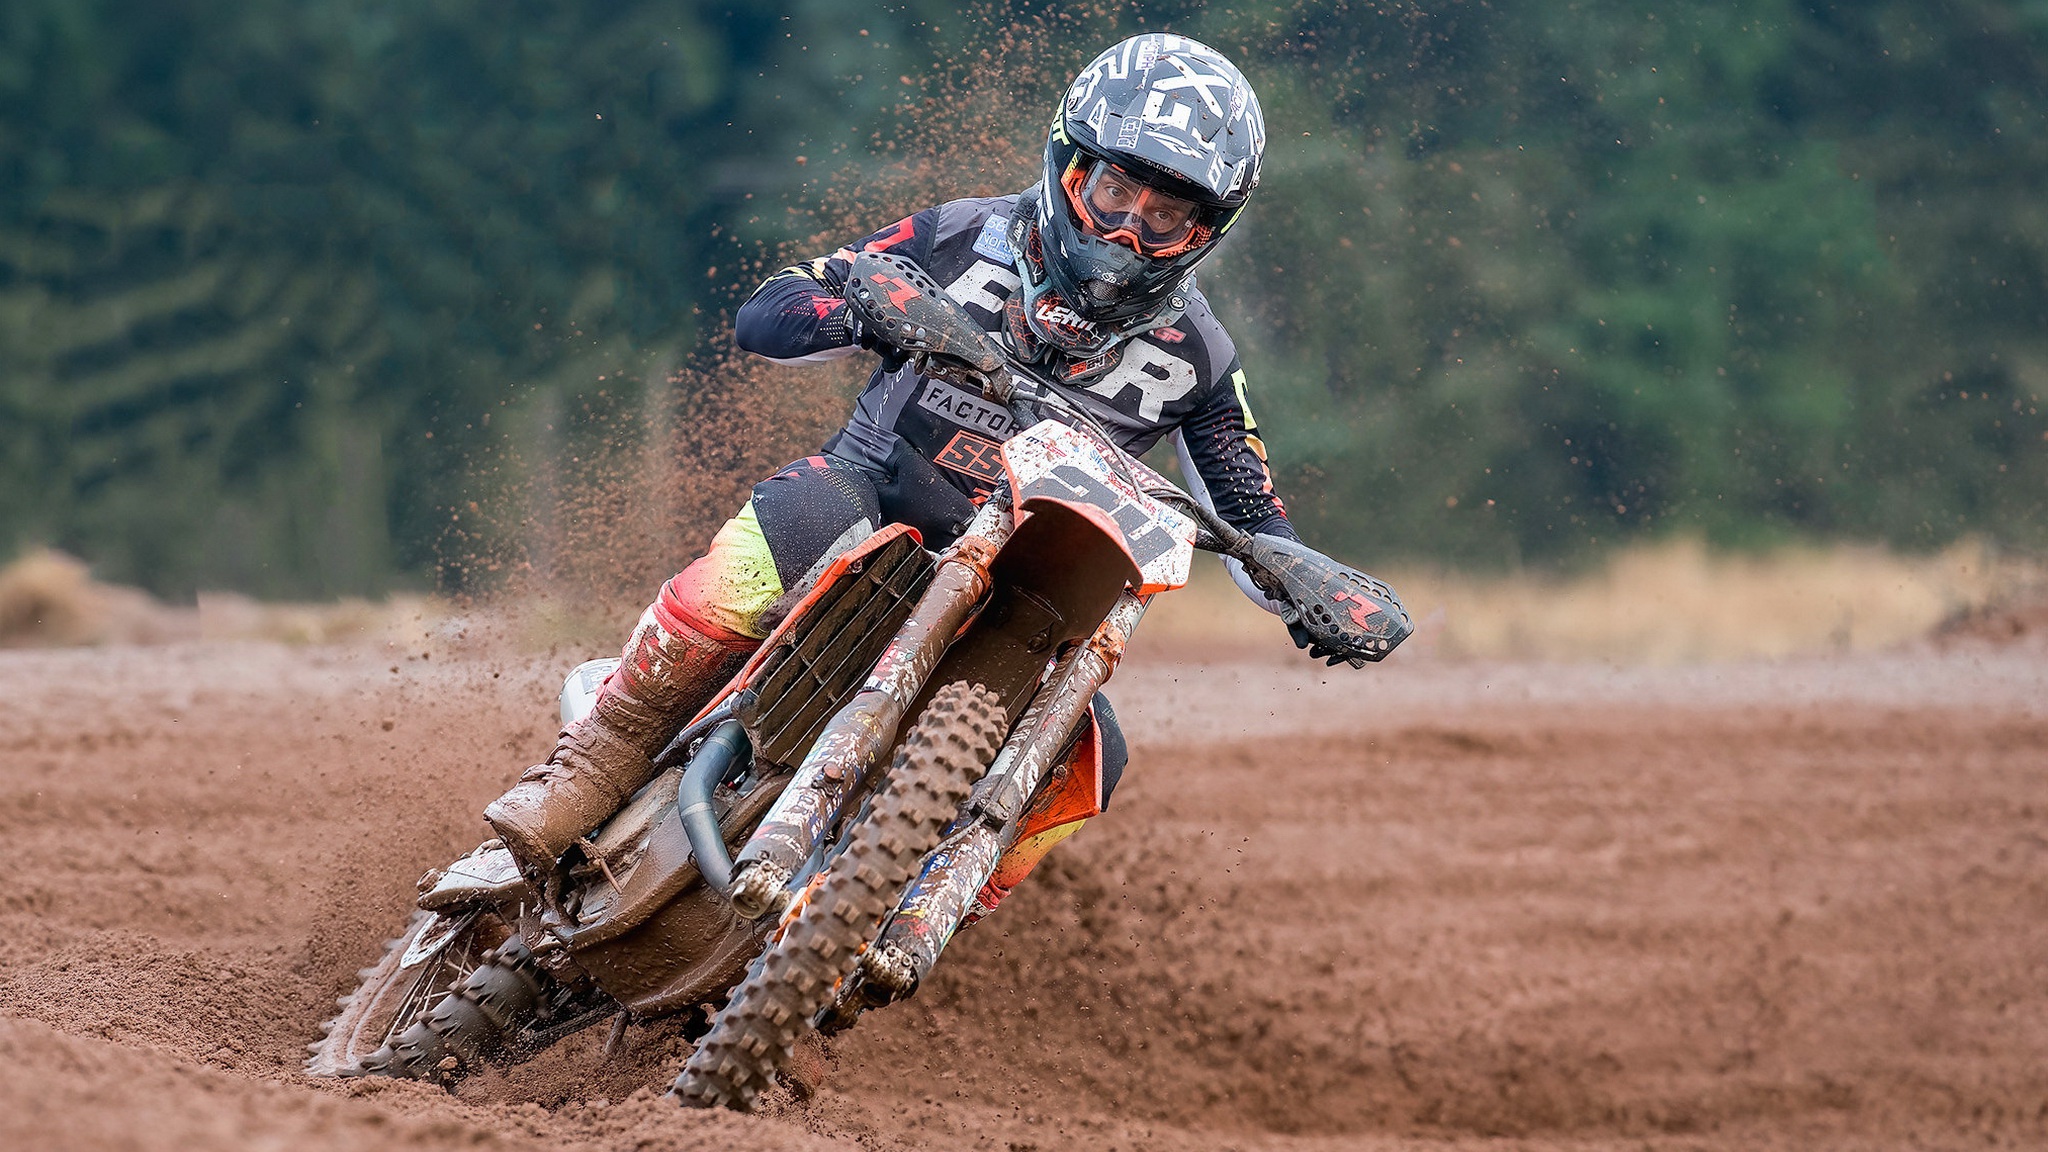  Motocross HD Android Wallpapers